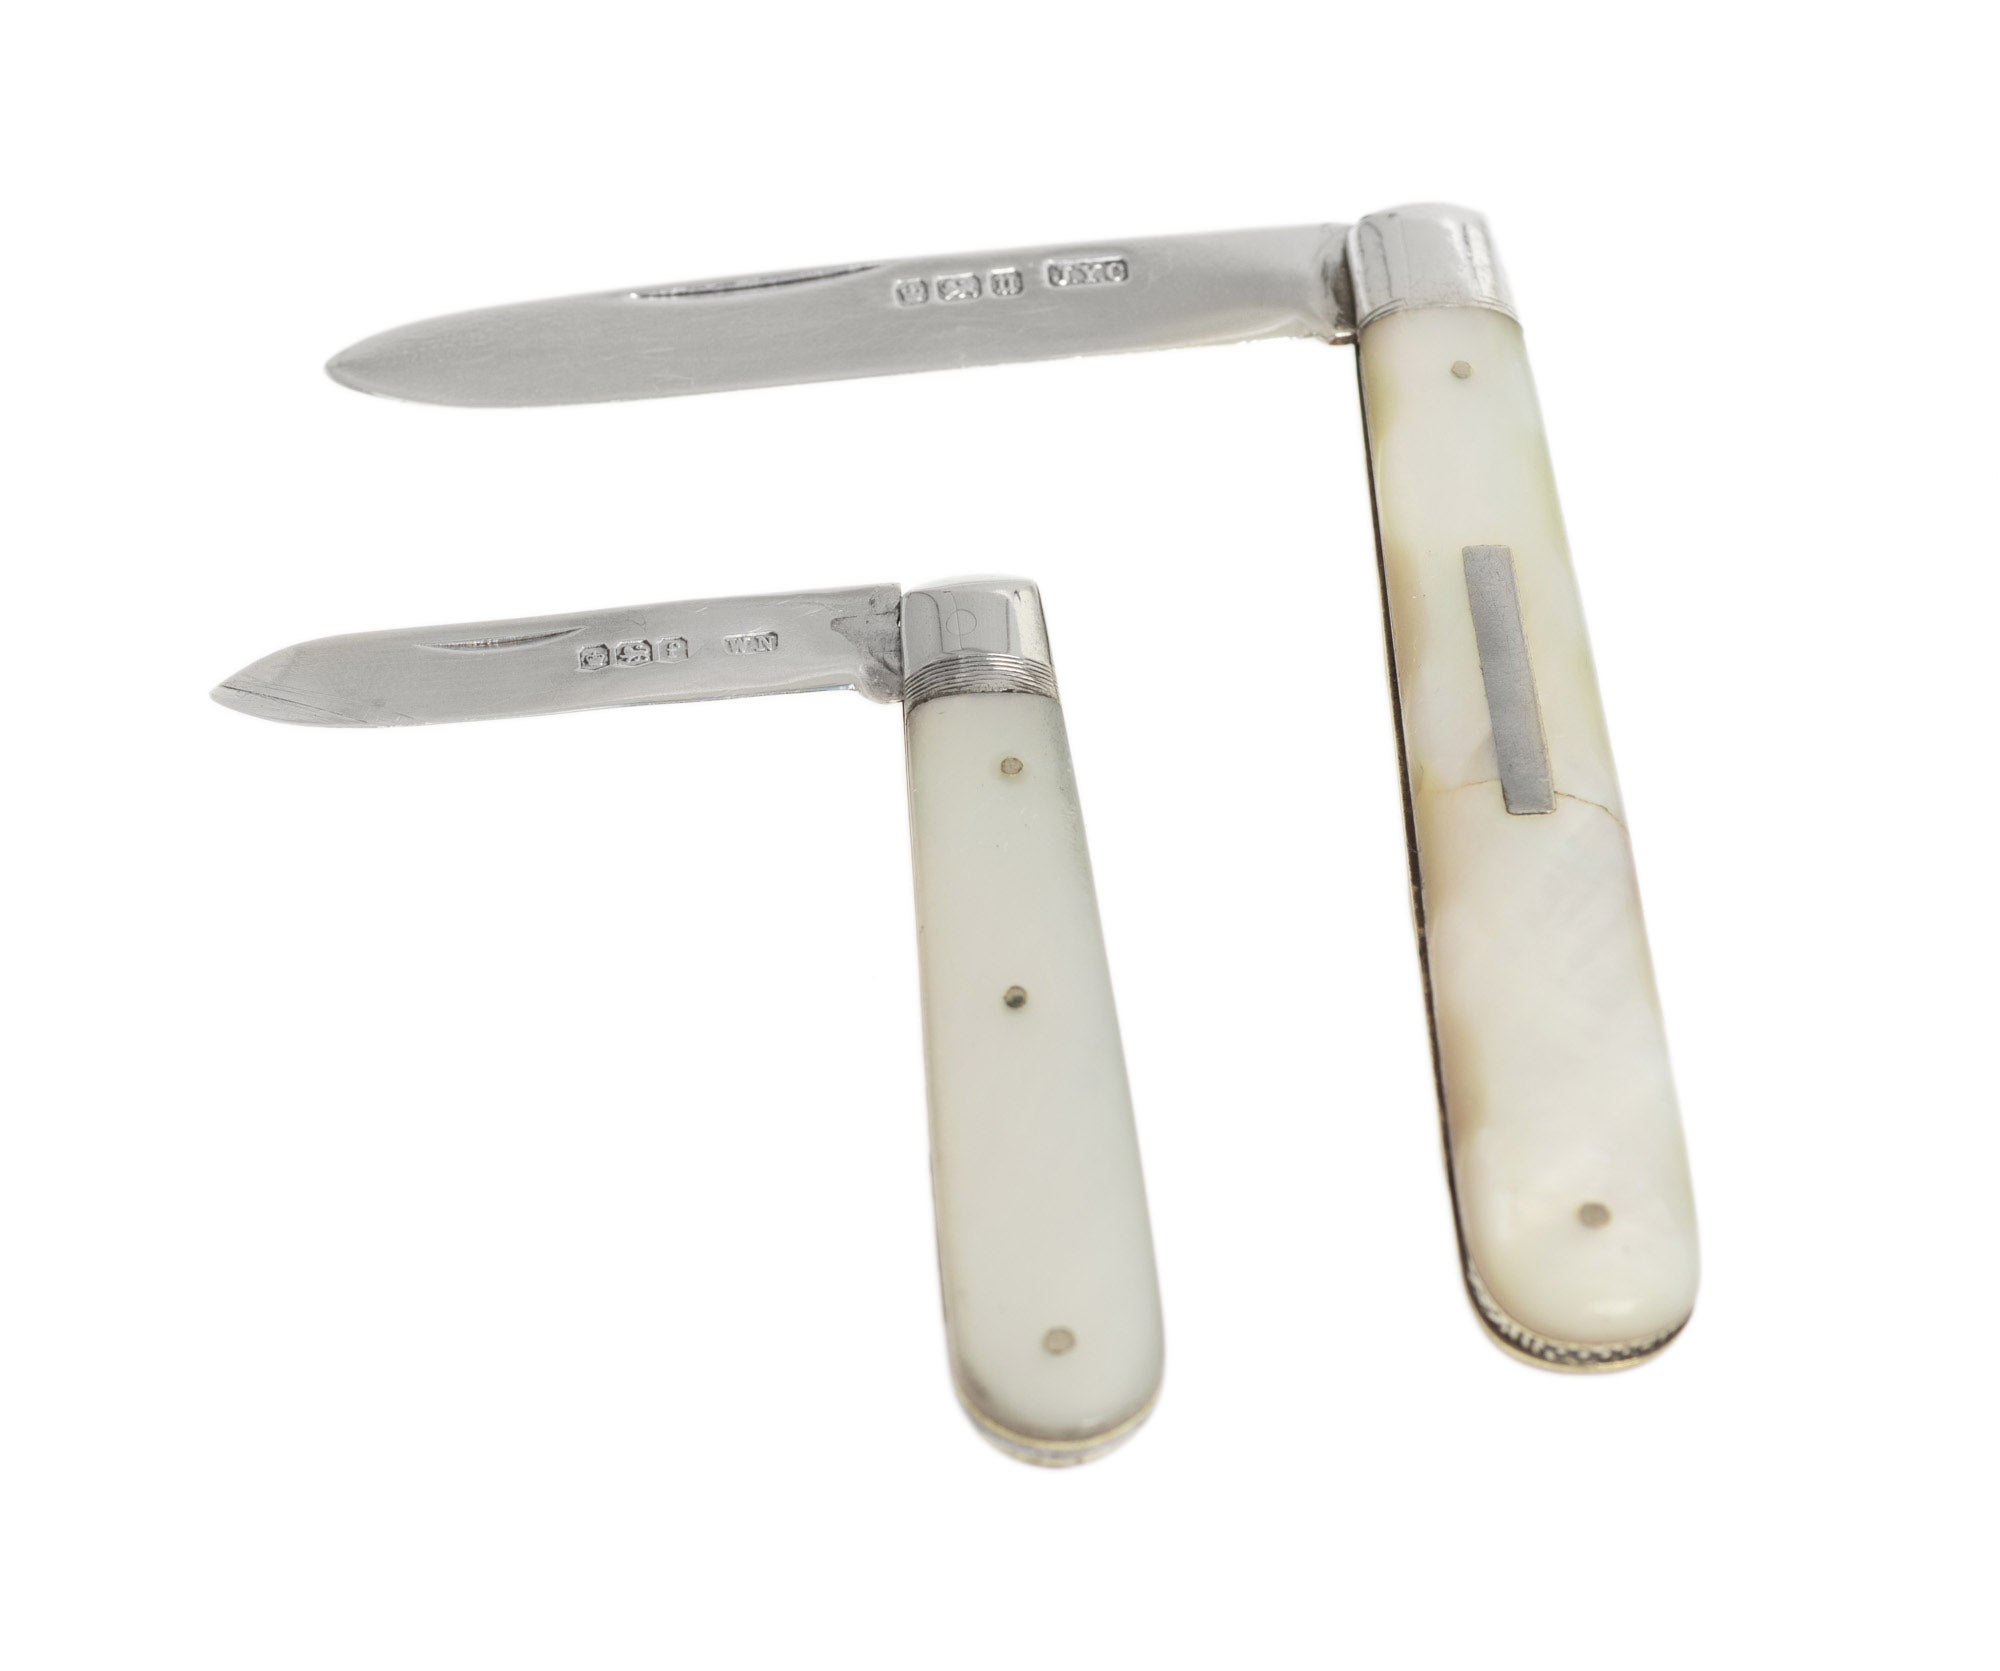 Fruit Knives – Beeches Vintage